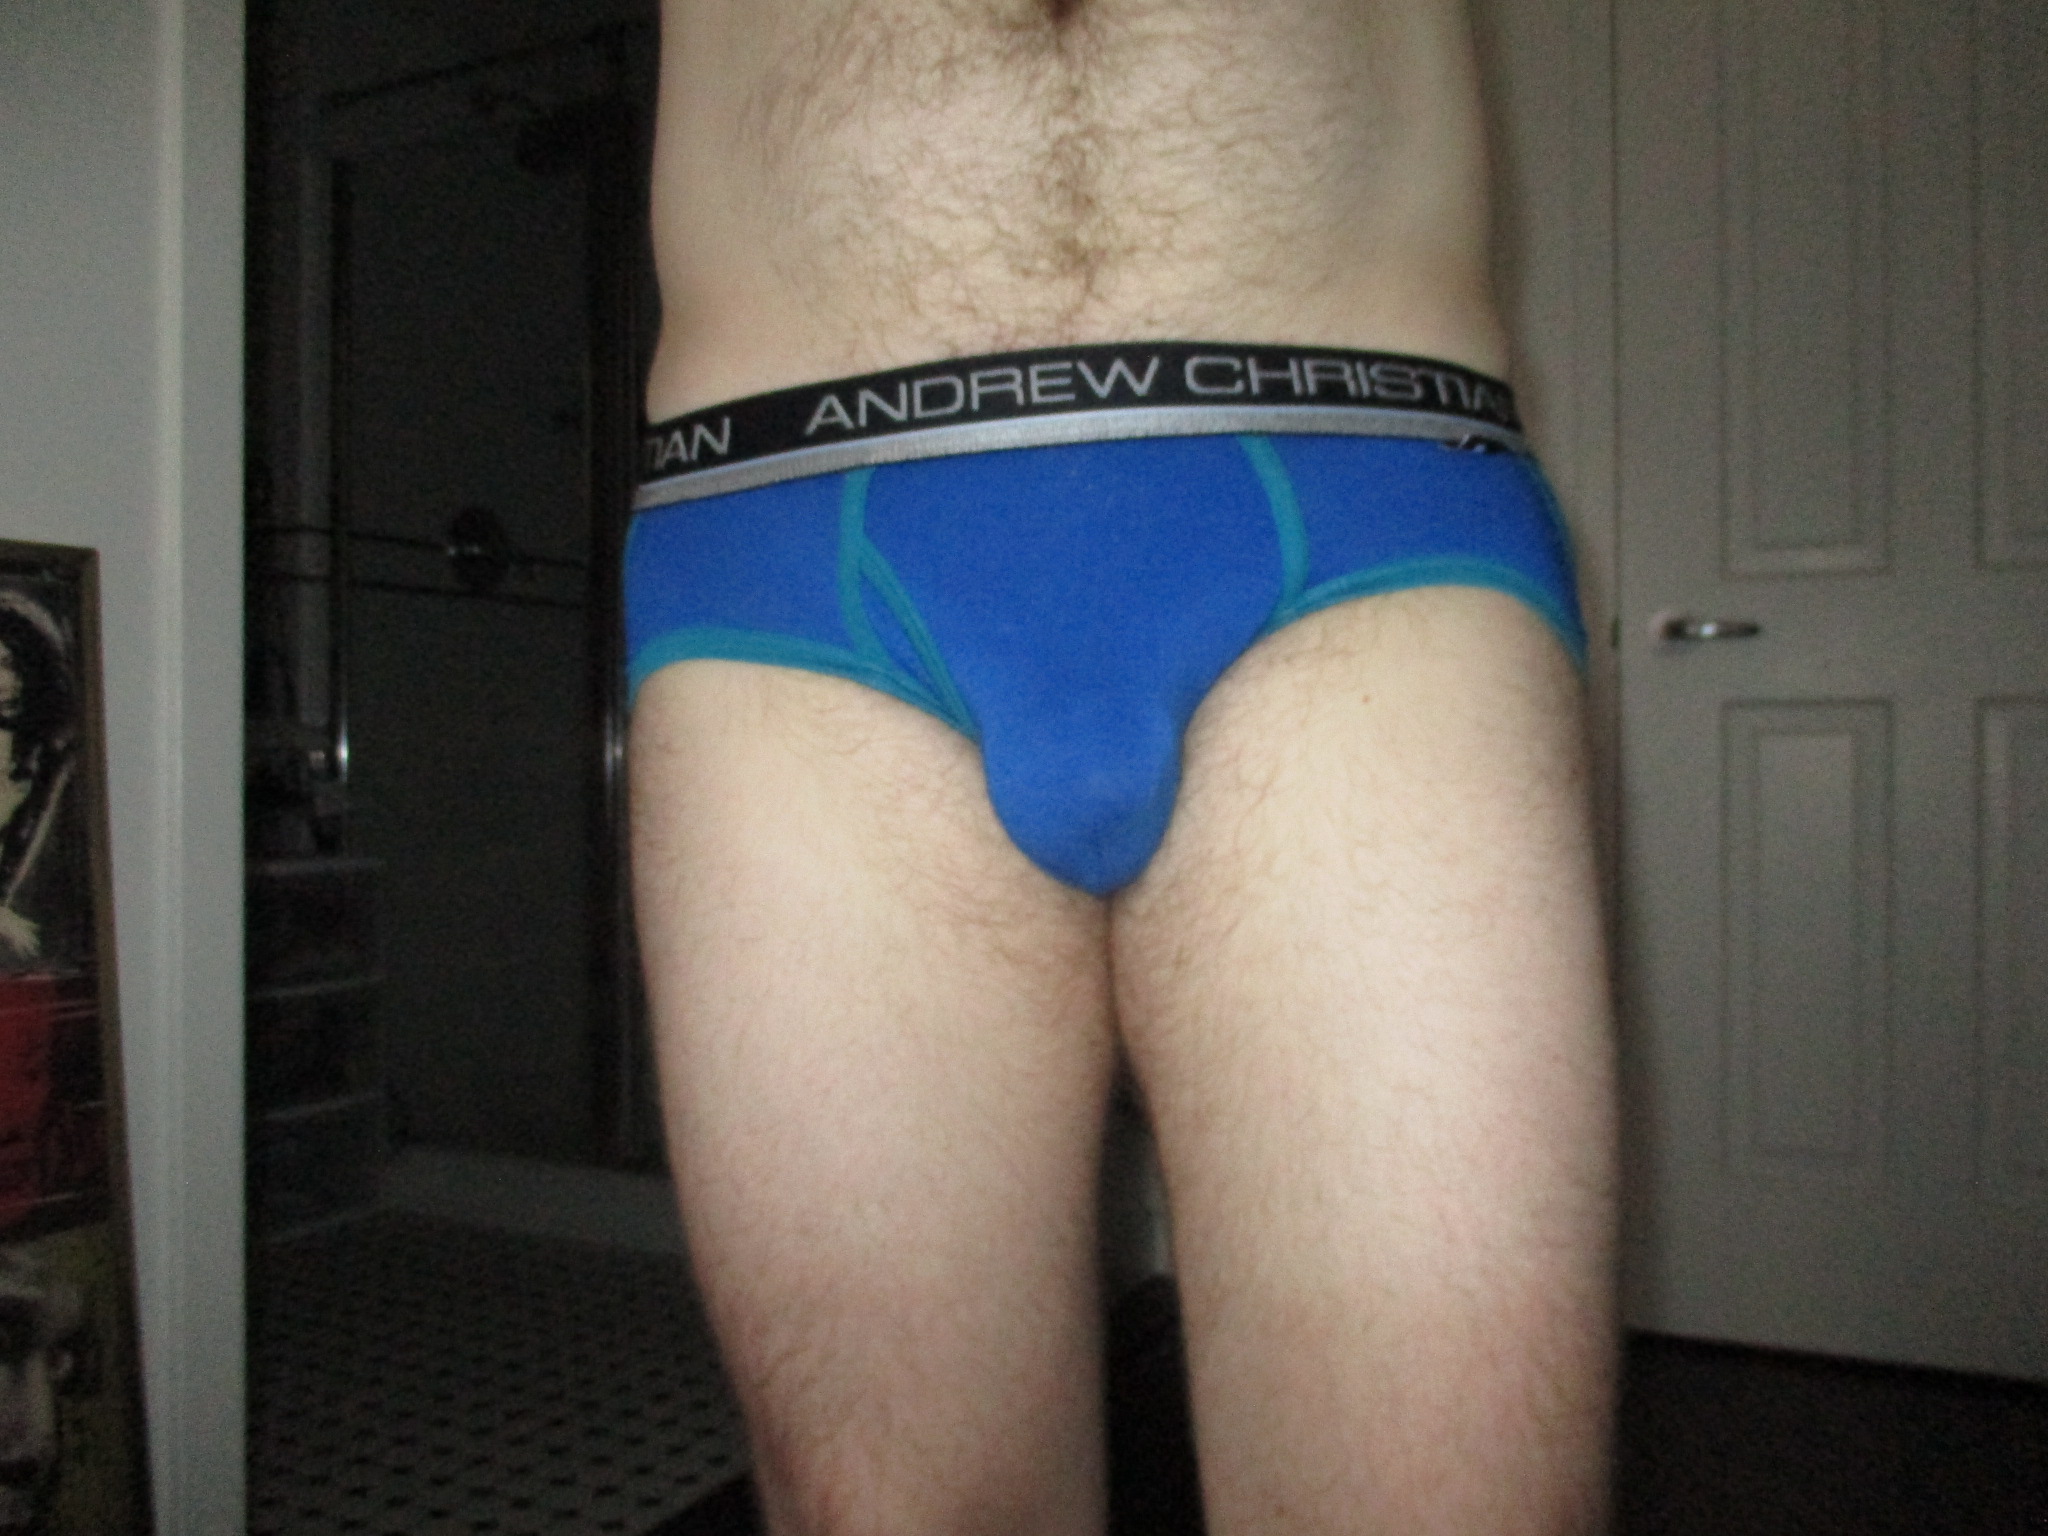 Brief-Jock…the answer to the briefs or jock struggle…